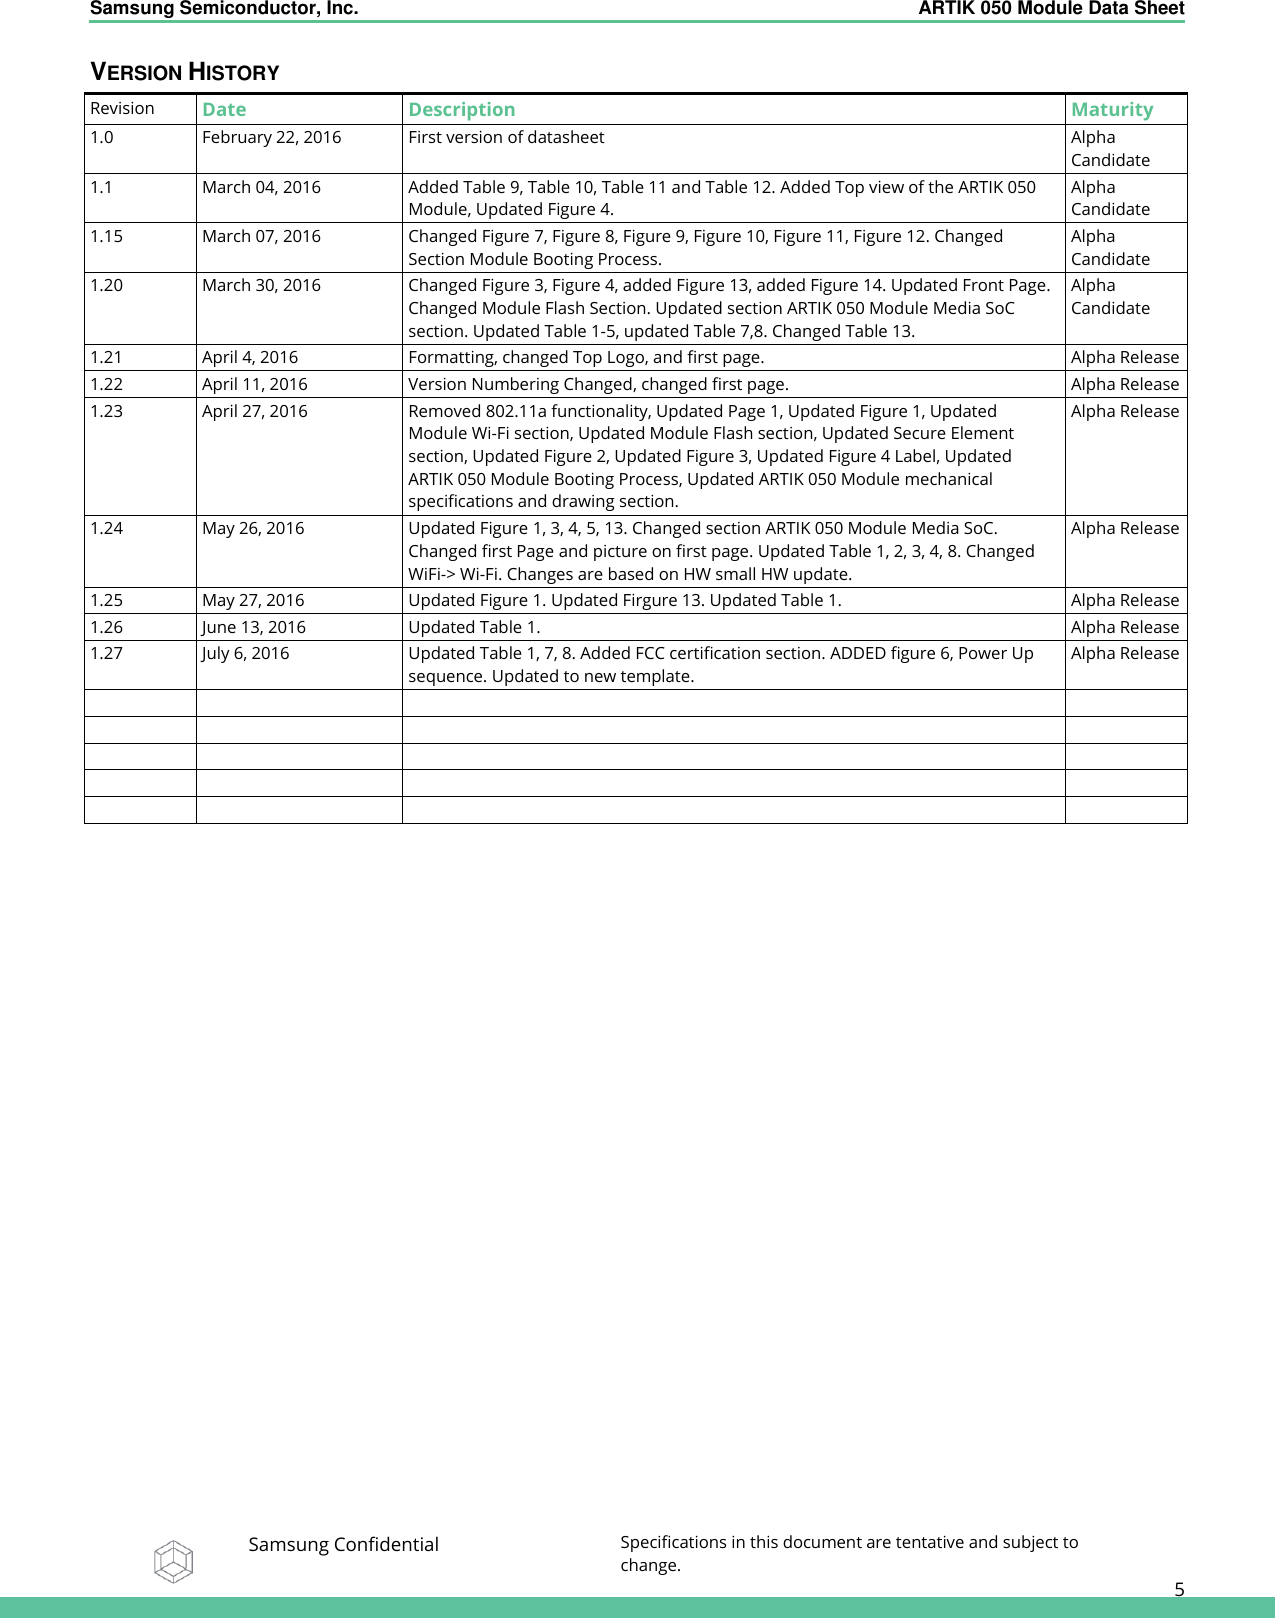 Samsung Semiconductor, Inc.  ARTIK 050 Module Data Sheet   Samsung Confidential Specifications in this document are tentative and subject to change.  5 VERSION HISTORY Revision Date Description Maturity 1.0 February 22, 2016 First version of datasheet Alpha Candidate 1.1  March 04, 2016 Added Table 9, Table 10, Table 11 and Table 12. Added Top view of the ARTIK 050 Module, Updated Figure 4. Alpha Candidate 1.15 March 07, 2016 Changed Figure 7, Figure 8, Figure 9, Figure 10, Figure 11, Figure 12. Changed Section Module Booting Process. Alpha Candidate 1.20 March 30, 2016 Changed Figure 3, Figure 4, added Figure 13, added Figure 14. Updated Front Page. Changed Module Flash Section. Updated section ARTIK 050 Module Media SoC section. Updated Table 1-5, updated Table 7,8. Changed Table 13. Alpha Candidate 1.21 April 4, 2016 Formatting, changed Top Logo, and first page. Alpha Release 1.22 April 11, 2016 Version Numbering Changed, changed first page. Alpha Release 1.23 April 27, 2016 Removed 802.11a functionality, Updated Page 1, Updated Figure 1, Updated Module Wi-Fi section, Updated Module Flash section, Updated Secure Element section, Updated Figure 2, Updated Figure 3, Updated Figure 4 Label, Updated ARTIK 050 Module Booting Process, Updated ARTIK 050 Module mechanical specifications and drawing section. Alpha Release 1.24 May 26, 2016 Updated Figure 1, 3, 4, 5, 13. Changed section ARTIK 050 Module Media SoC. Changed first Page and picture on first page. Updated Table 1, 2, 3, 4, 8. Changed WiFi-&gt; Wi-Fi. Changes are based on HW small HW update. Alpha Release 1.25 May 27, 2016 Updated Figure 1. Updated Firgure 13. Updated Table 1. Alpha Release 1.26 June 13, 2016 Updated Table 1. Alpha Release 1.27 July 6, 2016 Updated Table 1, 7, 8. Added FCC certification section. ADDED figure 6, Power Up sequence. Updated to new template. Alpha Release                      